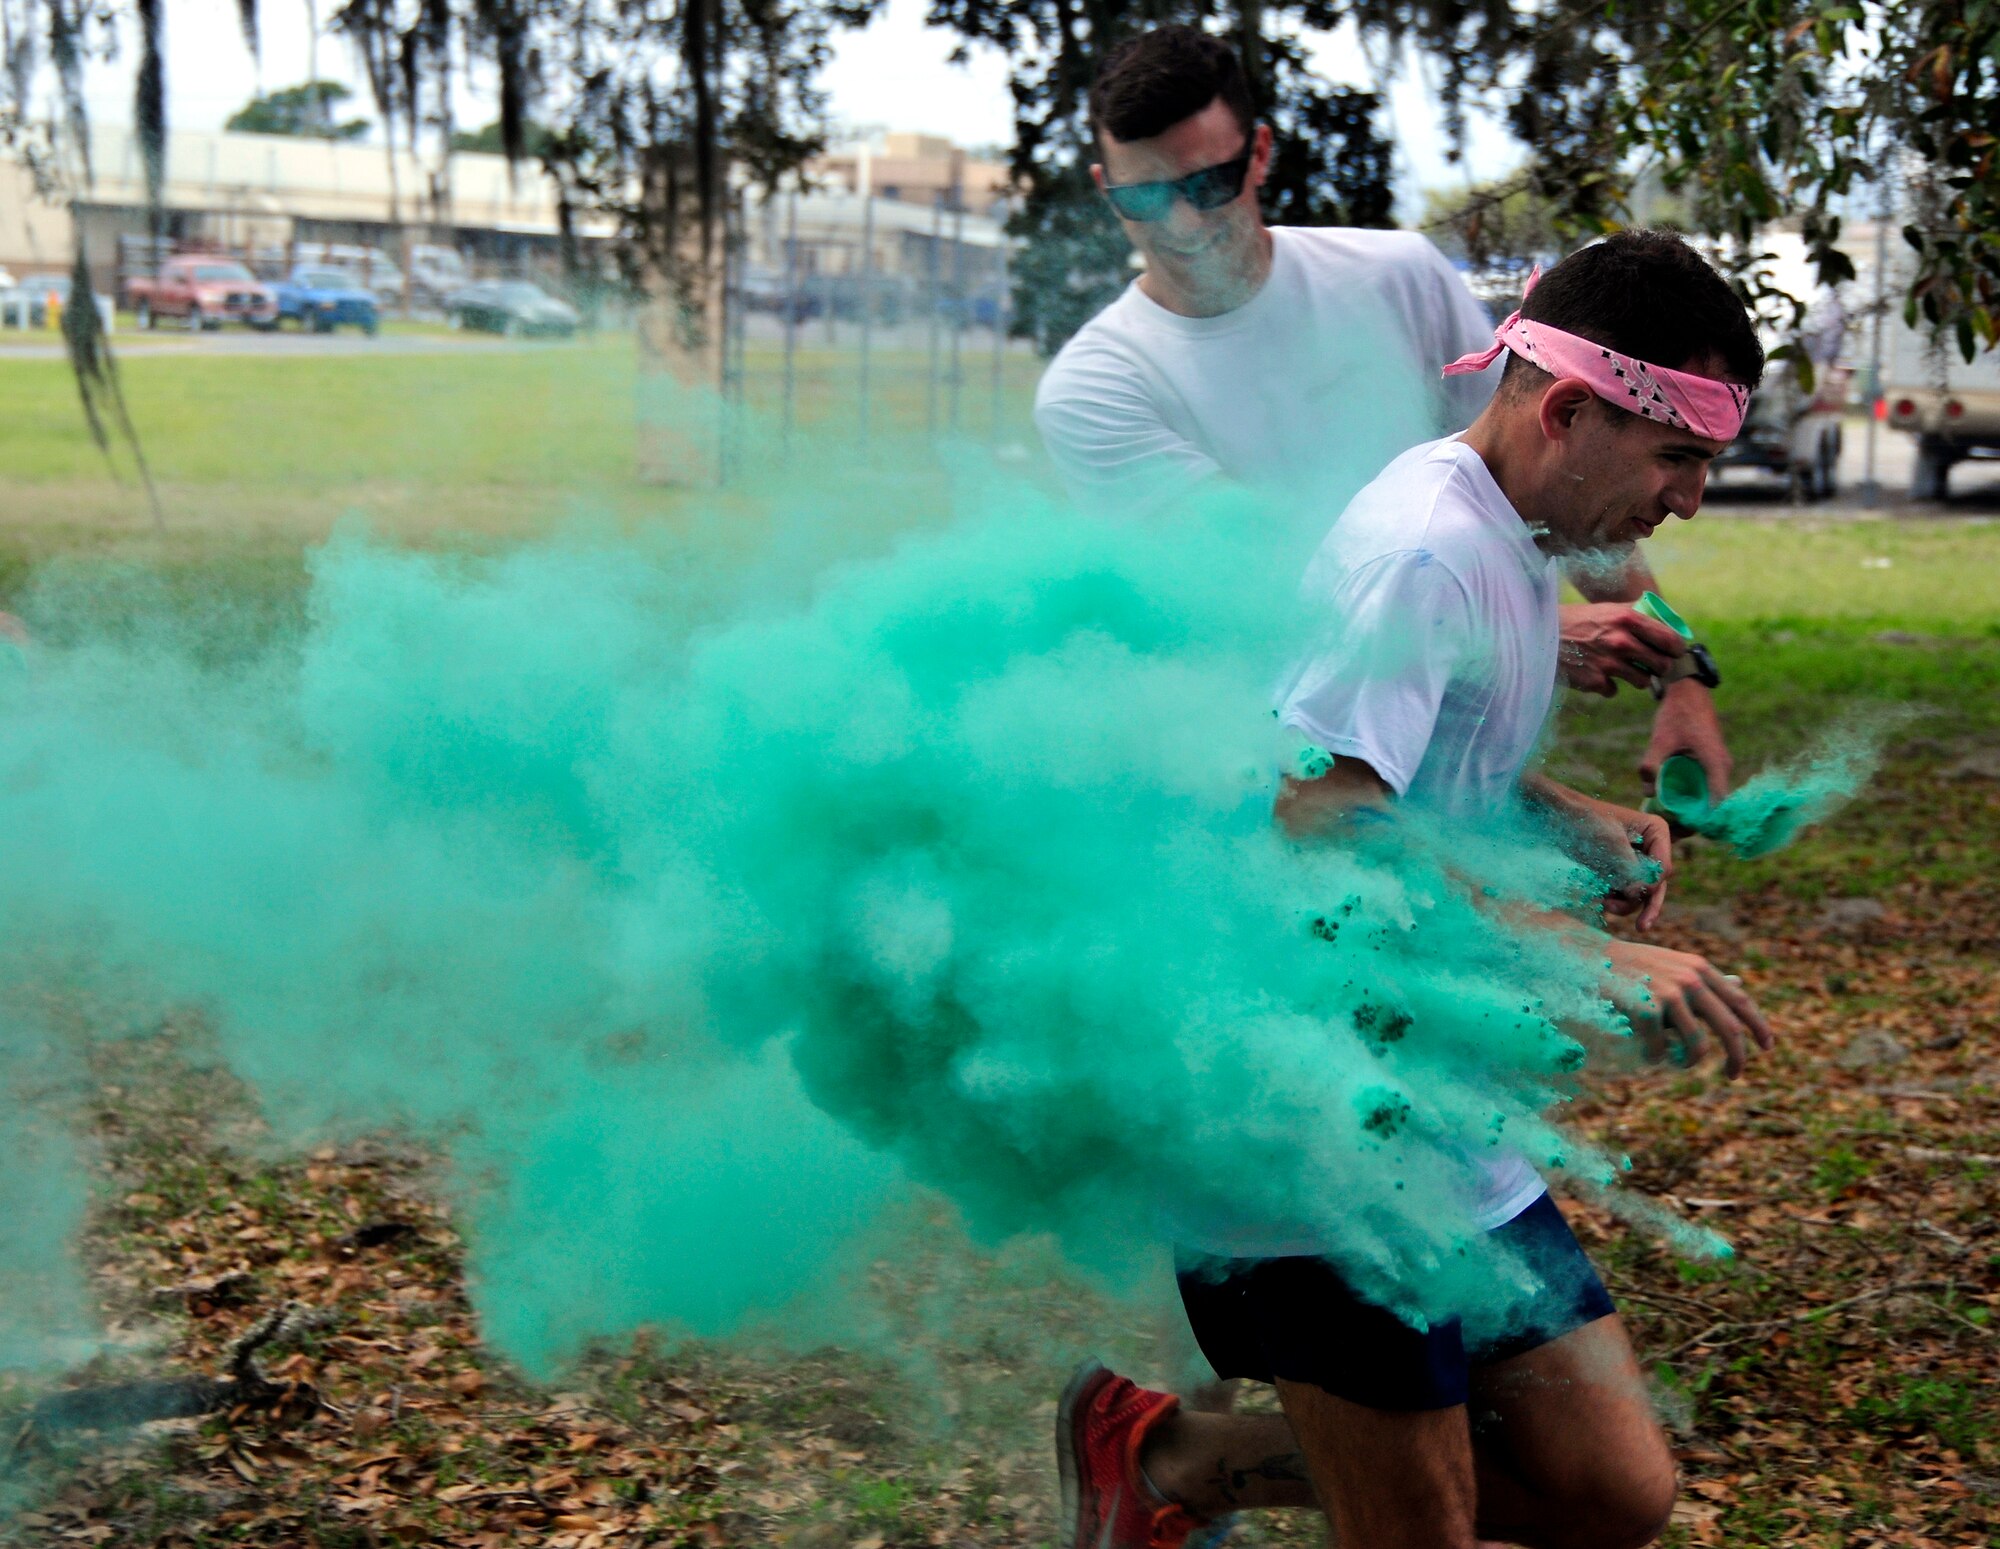 A runner is blasted with green dust during the Color Me Aware fun run, April 4, at Eglin Air Force Base, Fla.  Approximately 30 volunteers helped more than 450 participants get colorful during three color zones of the three-mile run.  The event highlighted the start of Sexual Assault Awareness Month. (U.S. Air Force photo/Tech. Sgt. Cheryl Foster)